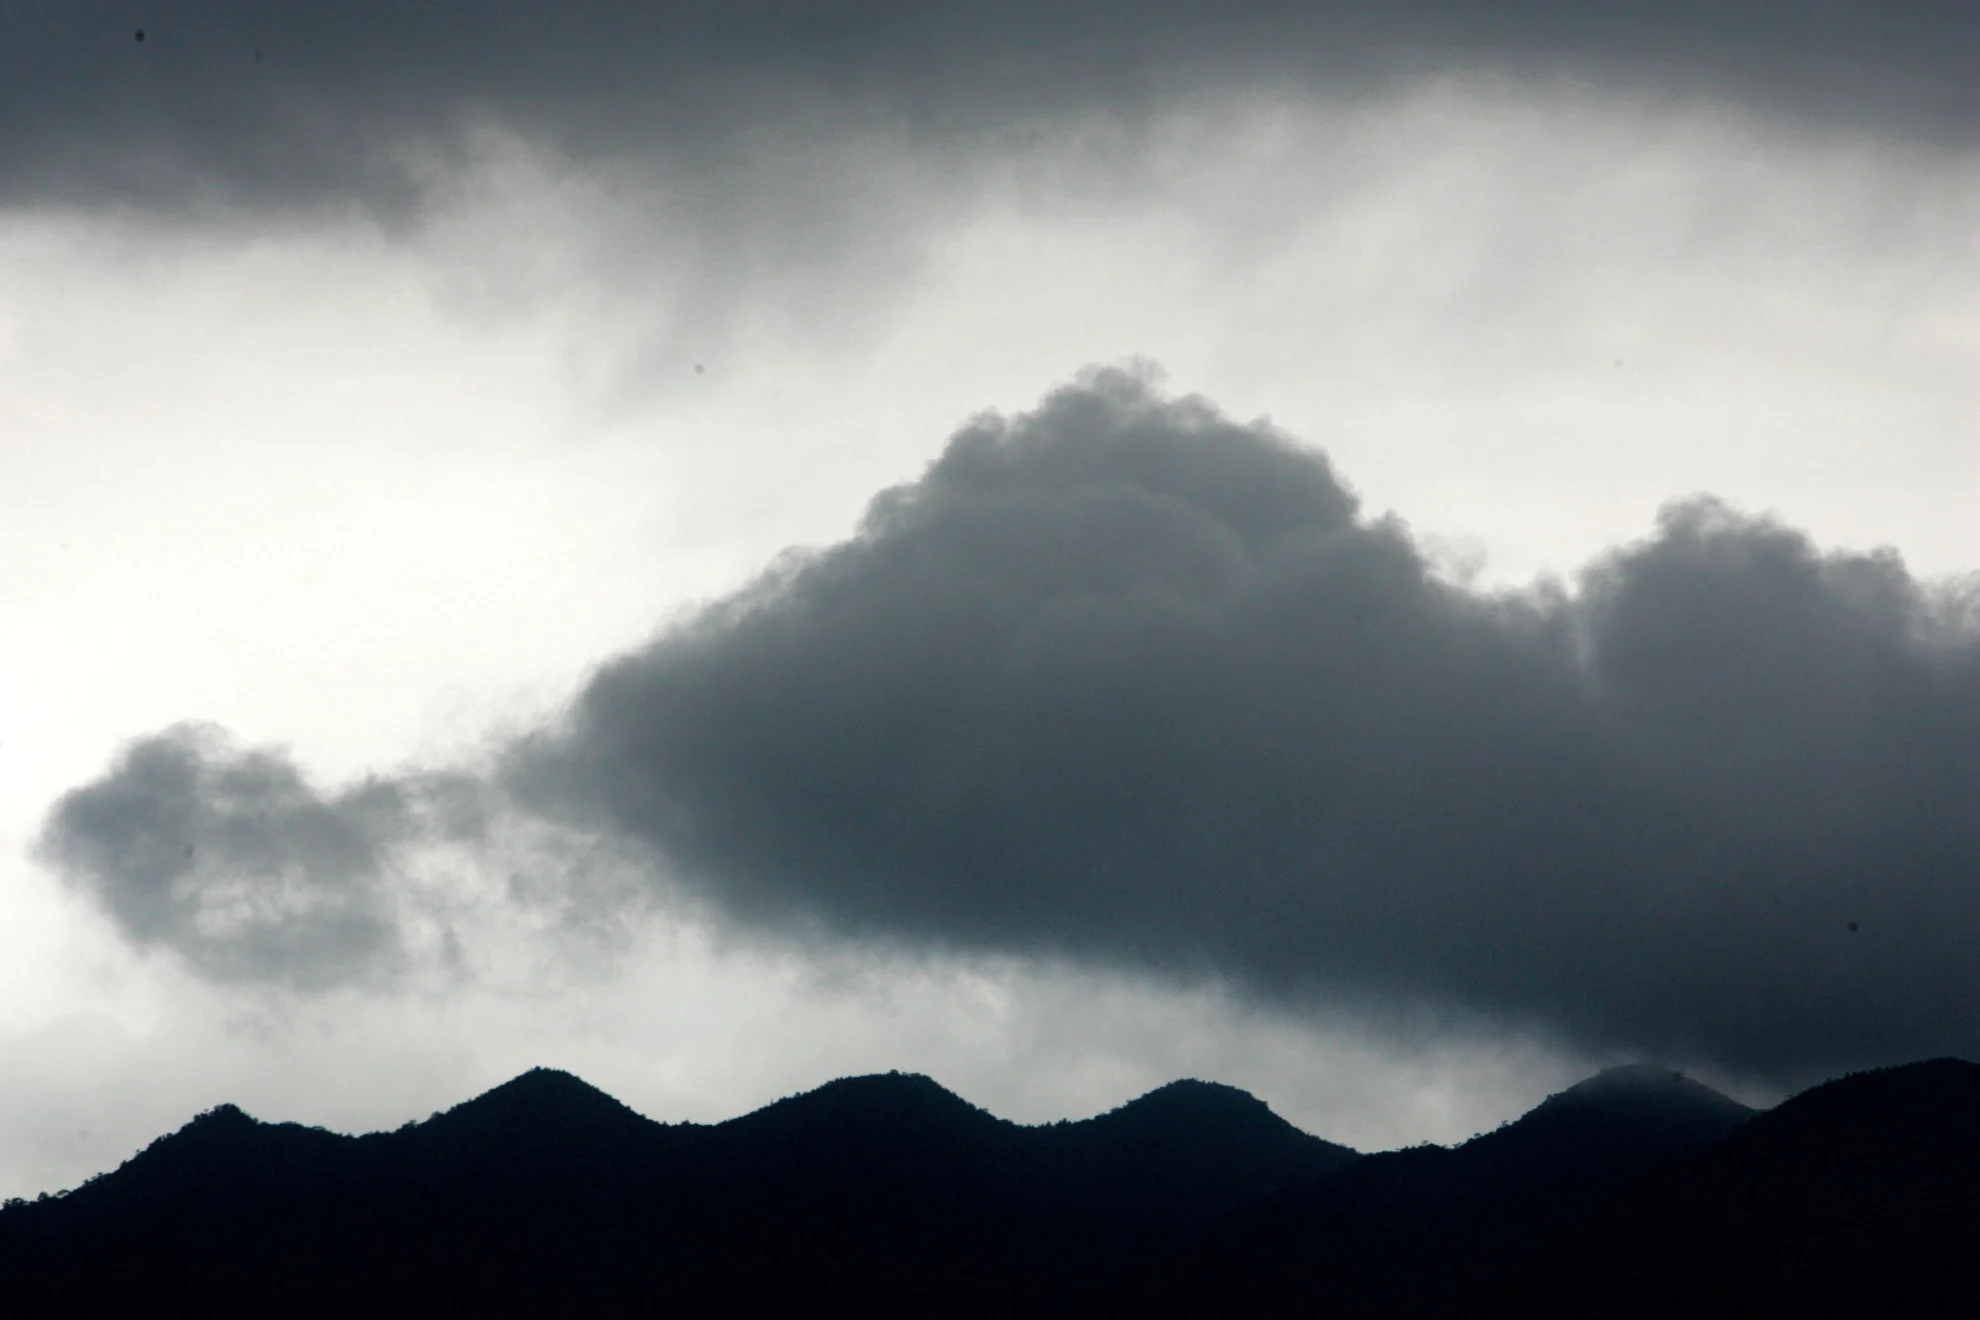 REUTERS- Dark clouds China-s Guangdong province - File Photo